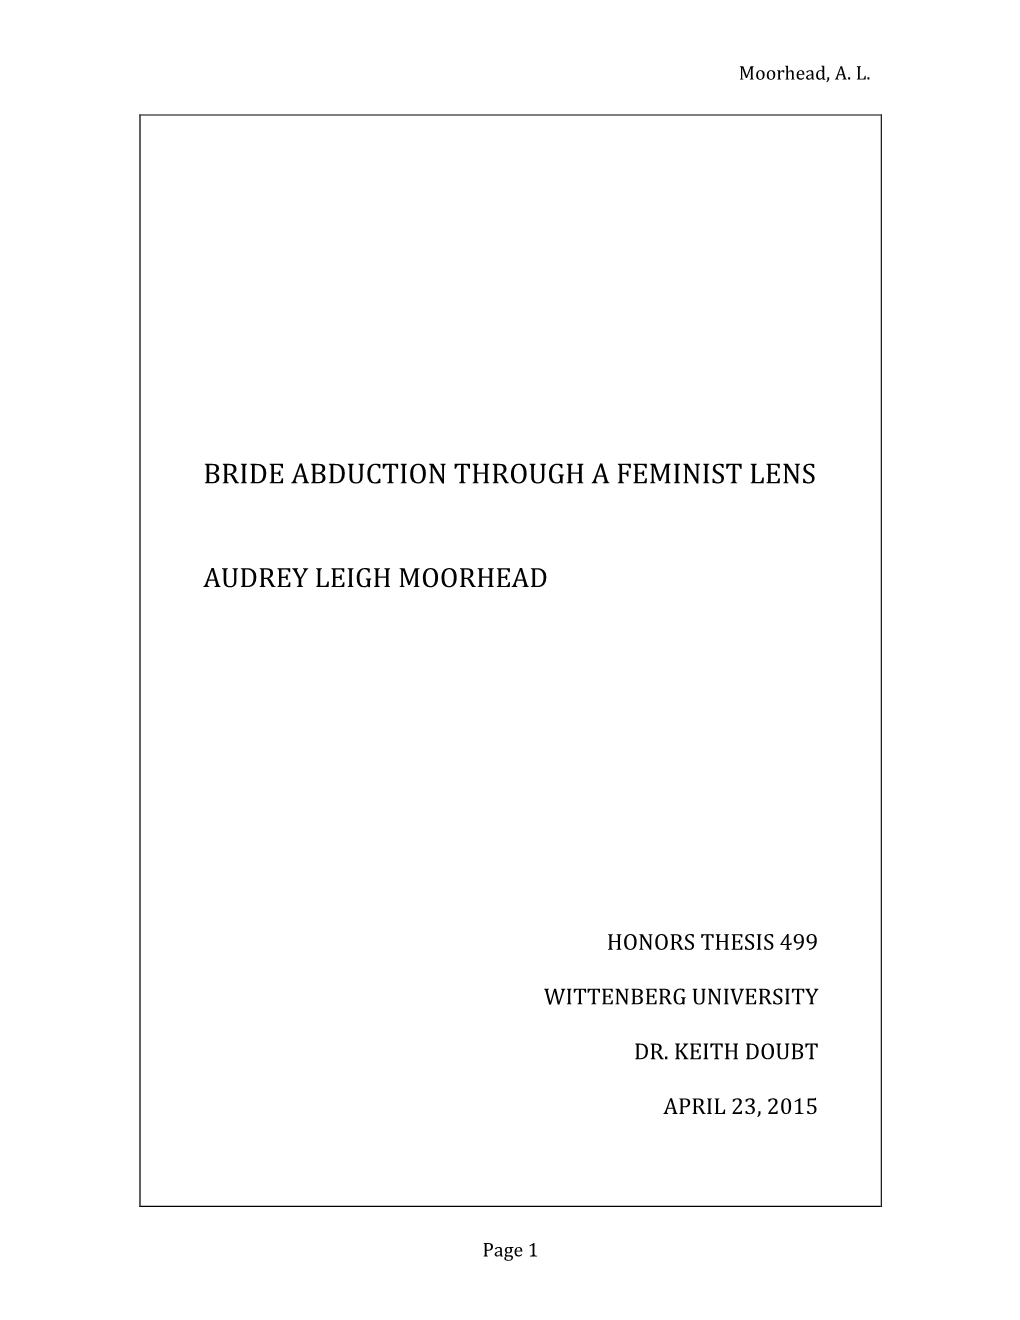 A Thorough Glance at the Social Framework of Bride Abduction from a Feminist Lens: Themes of Power, Dominance, and Shame.” Wittenberg University: Undergraduate Thesis